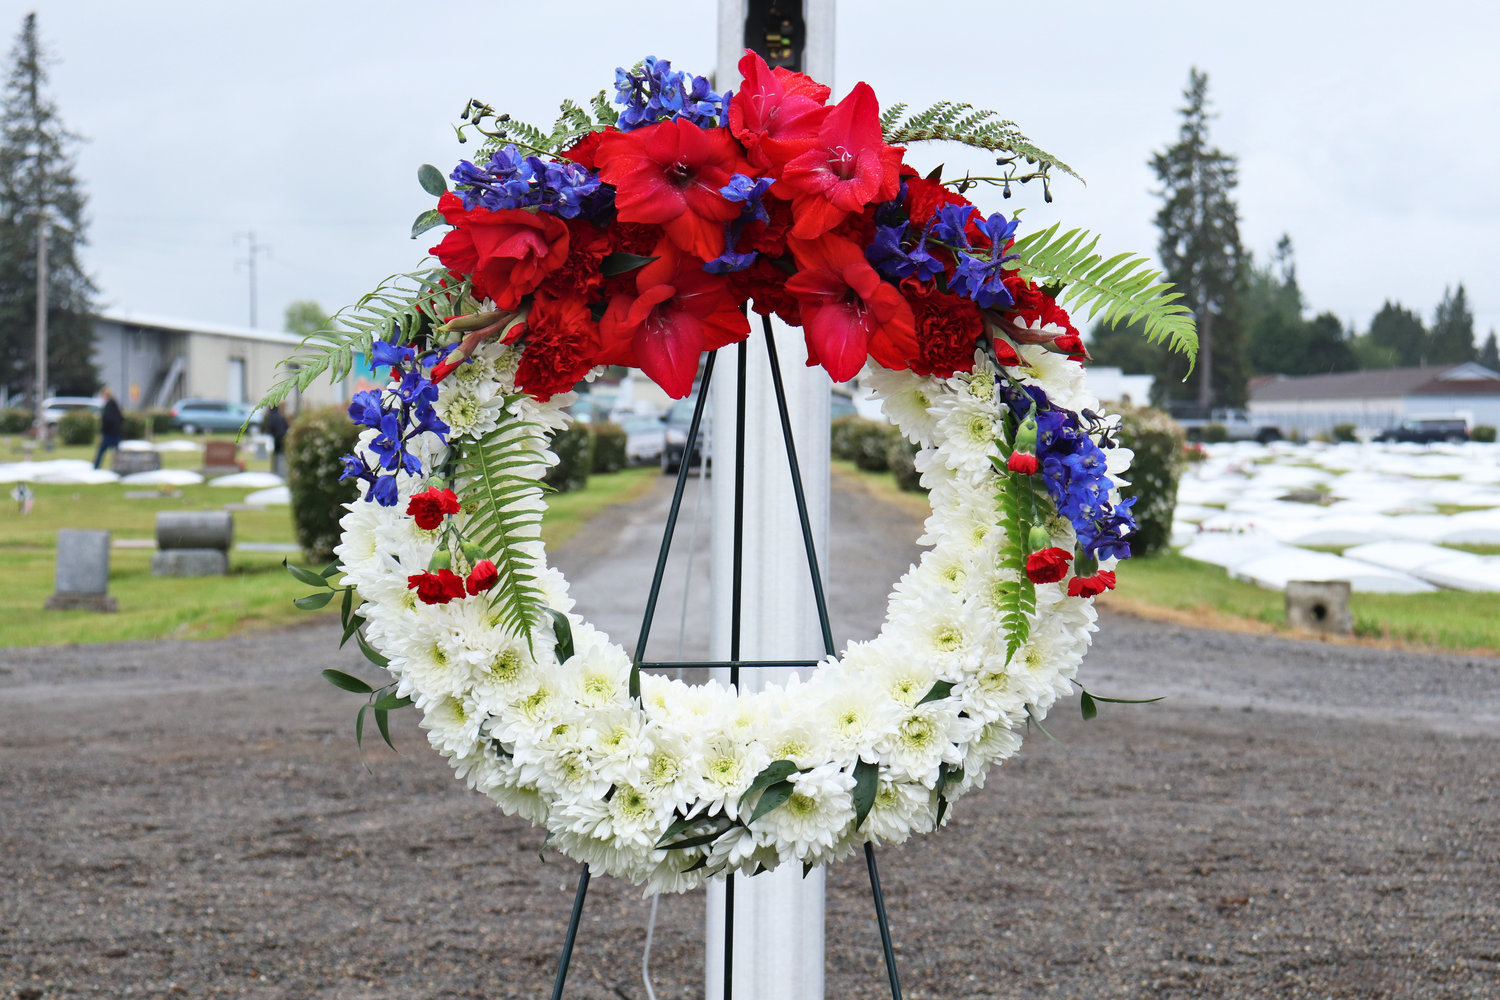 A memorial wreath adorns Sticklin Greenwood Memorial Park during a rededication ceremony on Saturday. Veterans of nearly every war are buried in the park’s historic cemetery, according to those who headed the restoration project.